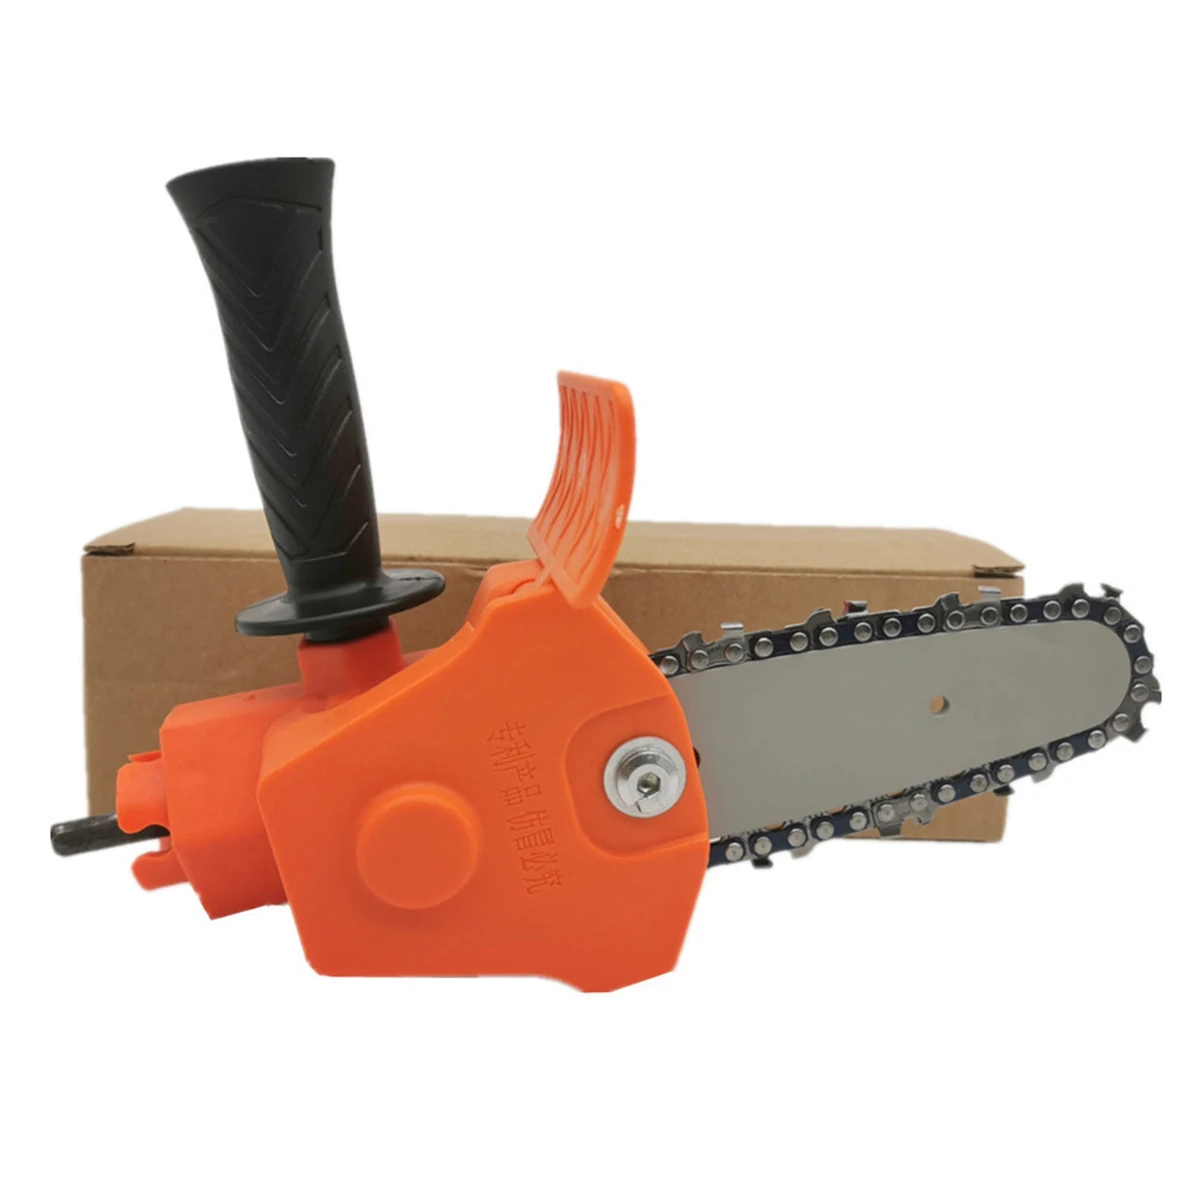 

Electric Drill Converter Into Electric Chain Saw Portable Pruning Saw 6 Inch Chainsaw Bracket (Orange)